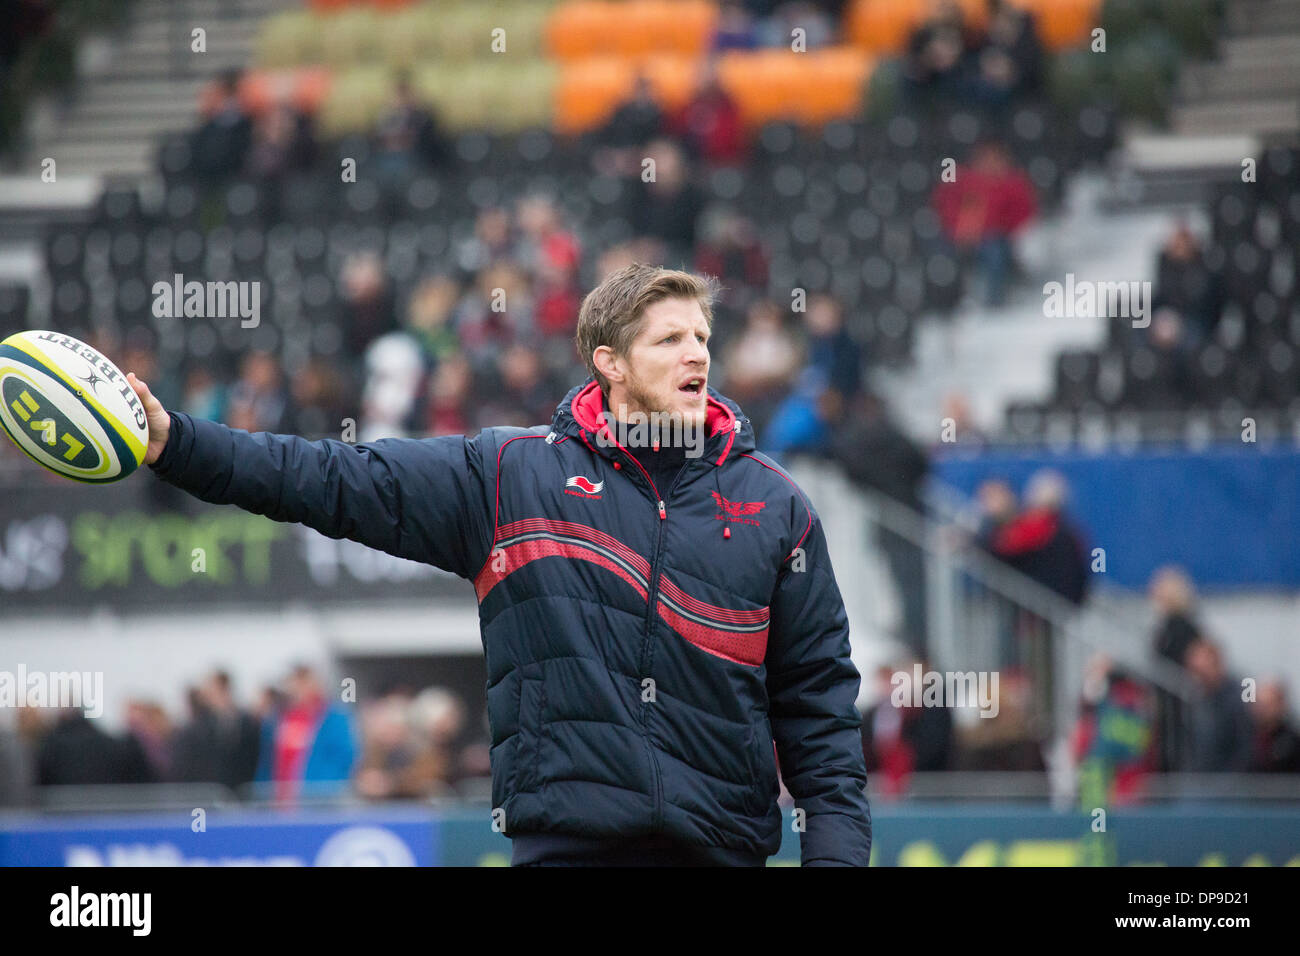 Simon Easterby, coach of Llanelli Scarlets rugby team Stock Photo